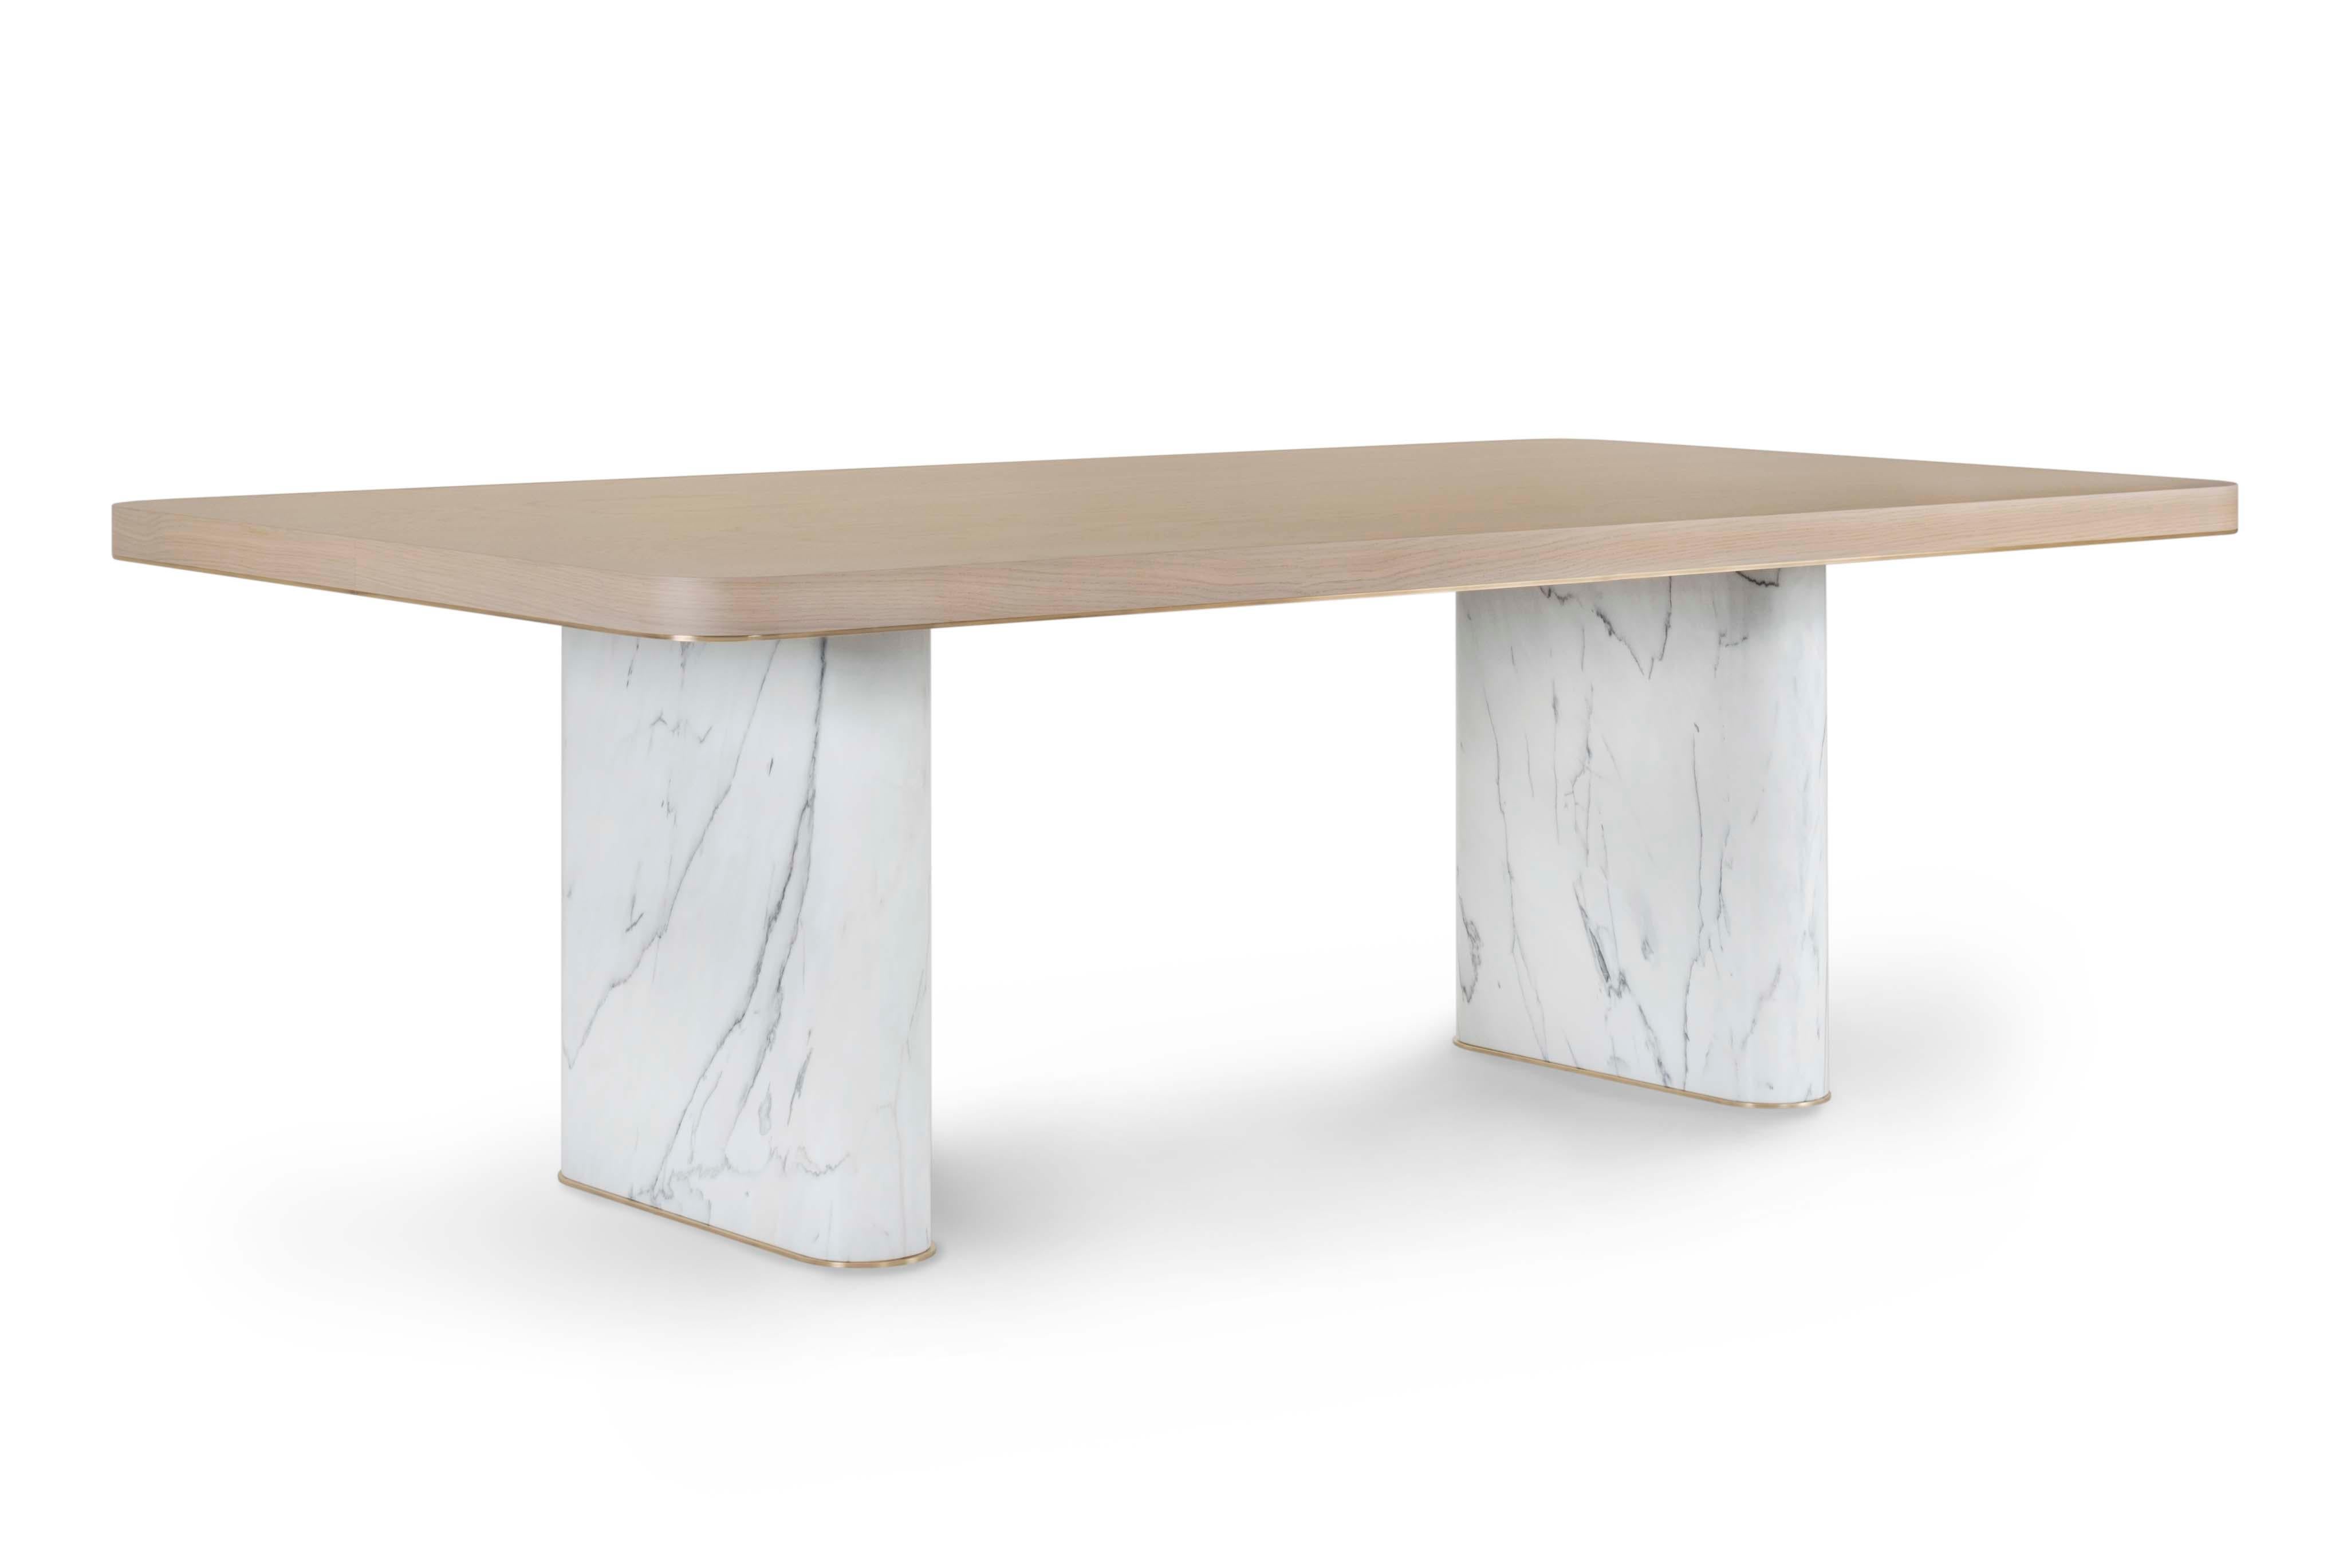 Modern Fall 8-Seat Dining Table in Calacatta Bianco Marble by Greenapple